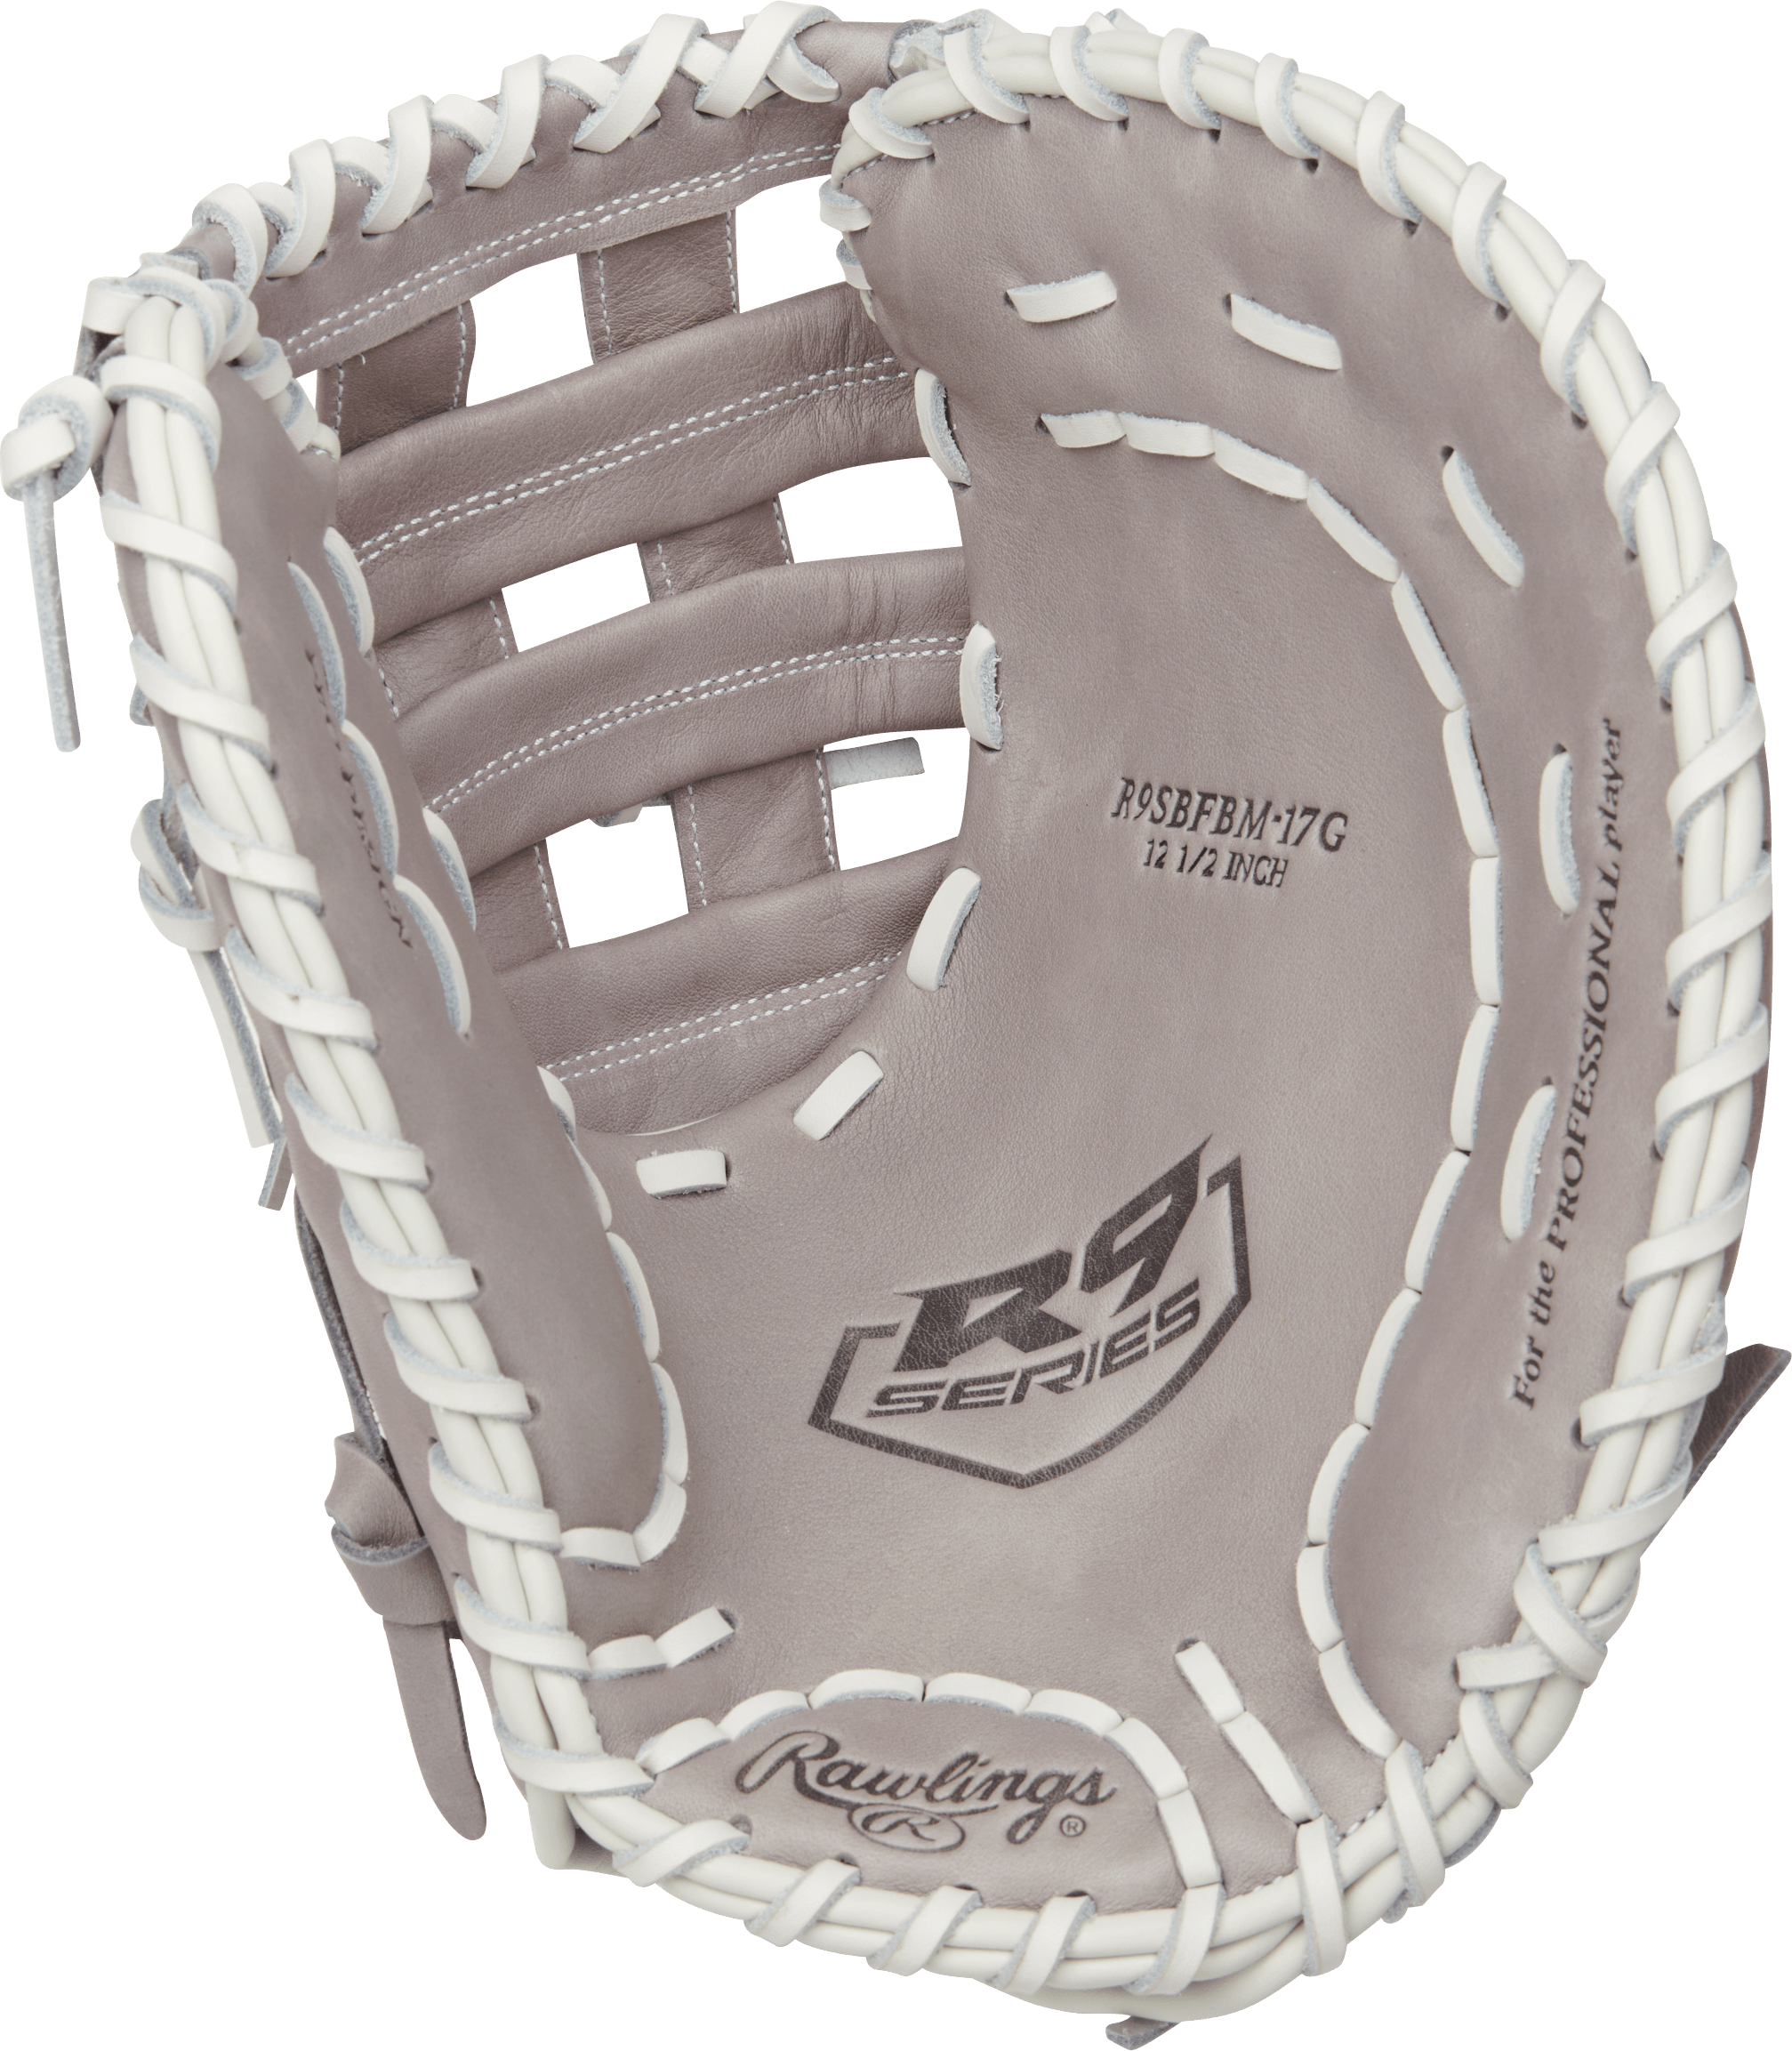 R9 Series 12.5 in Fastpitch First Base Mitt - Sports Excellence